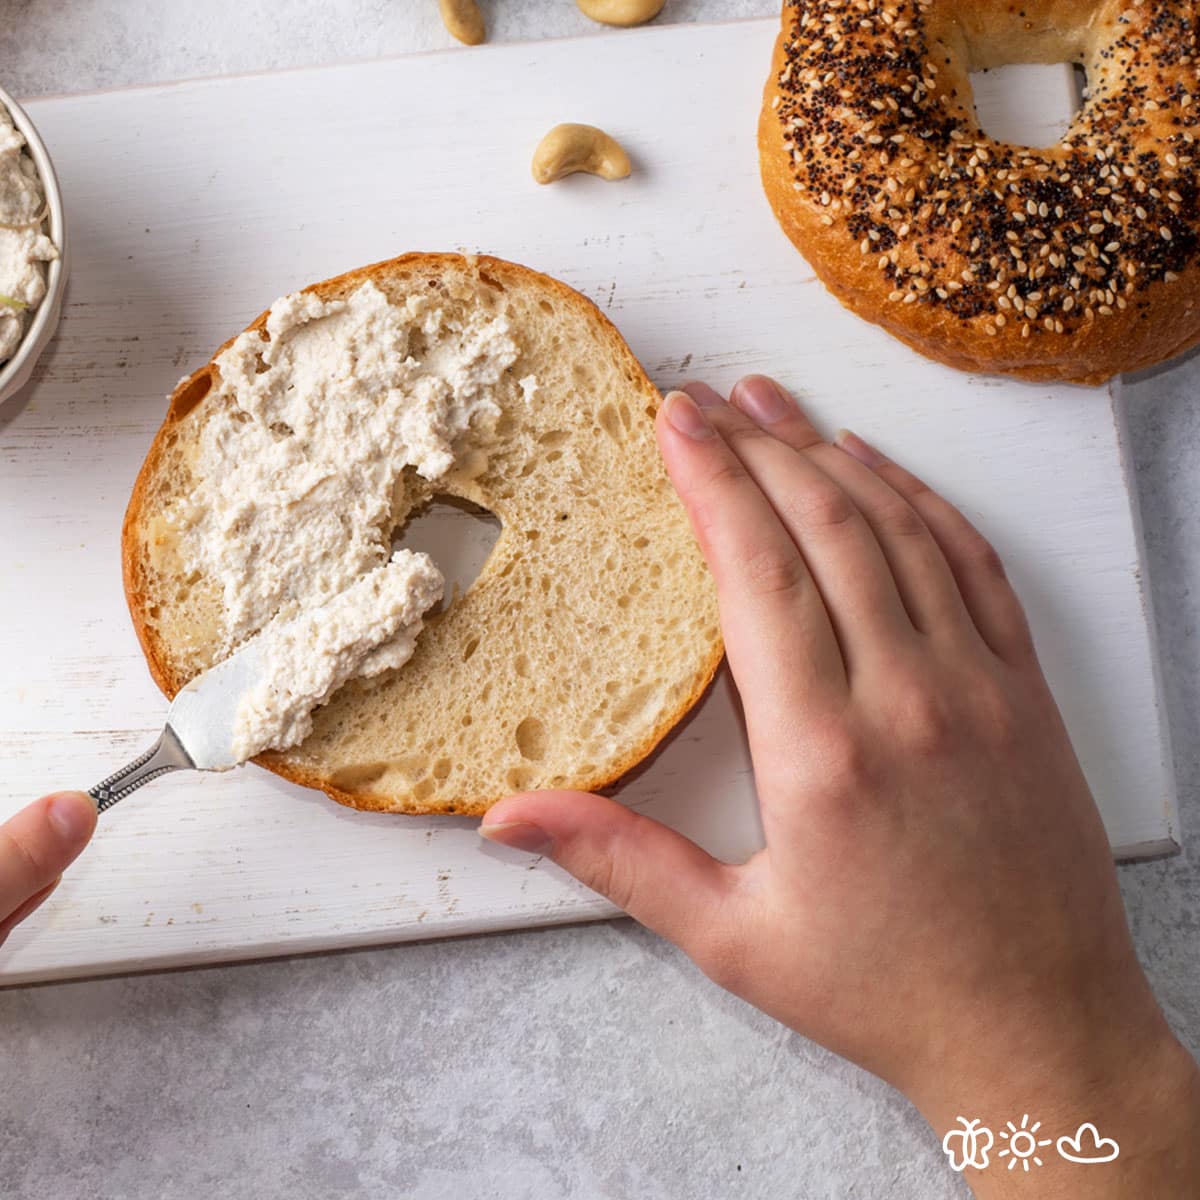 Cream cheese spread is spreadable by adding other ingredients like milk, cream, or stabilizers. Compared to cream cheese, spreads made with these ingredients are softer and easier to apply.